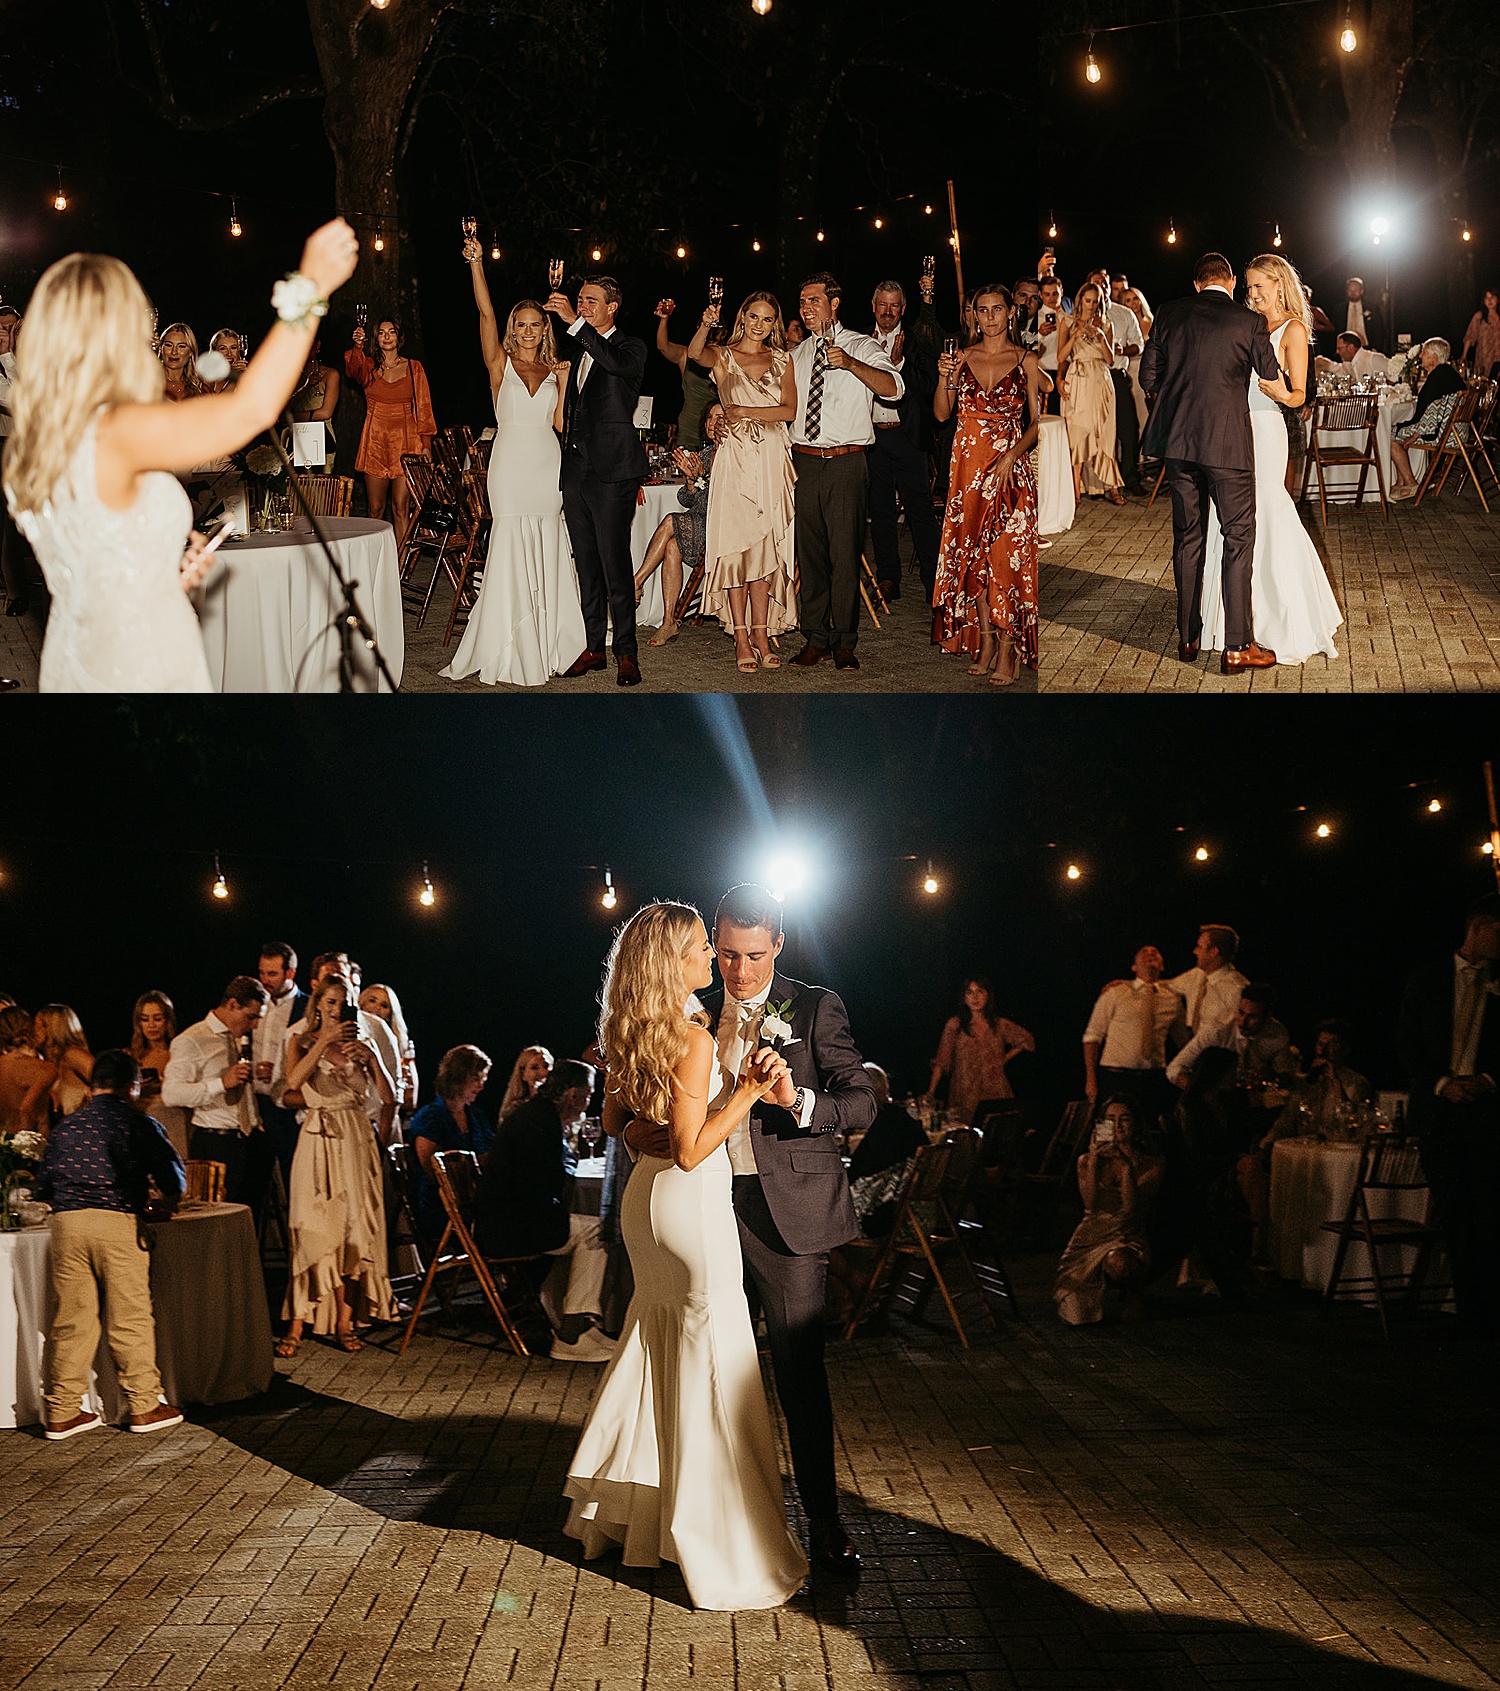 Bride and groom share first dance under string lights